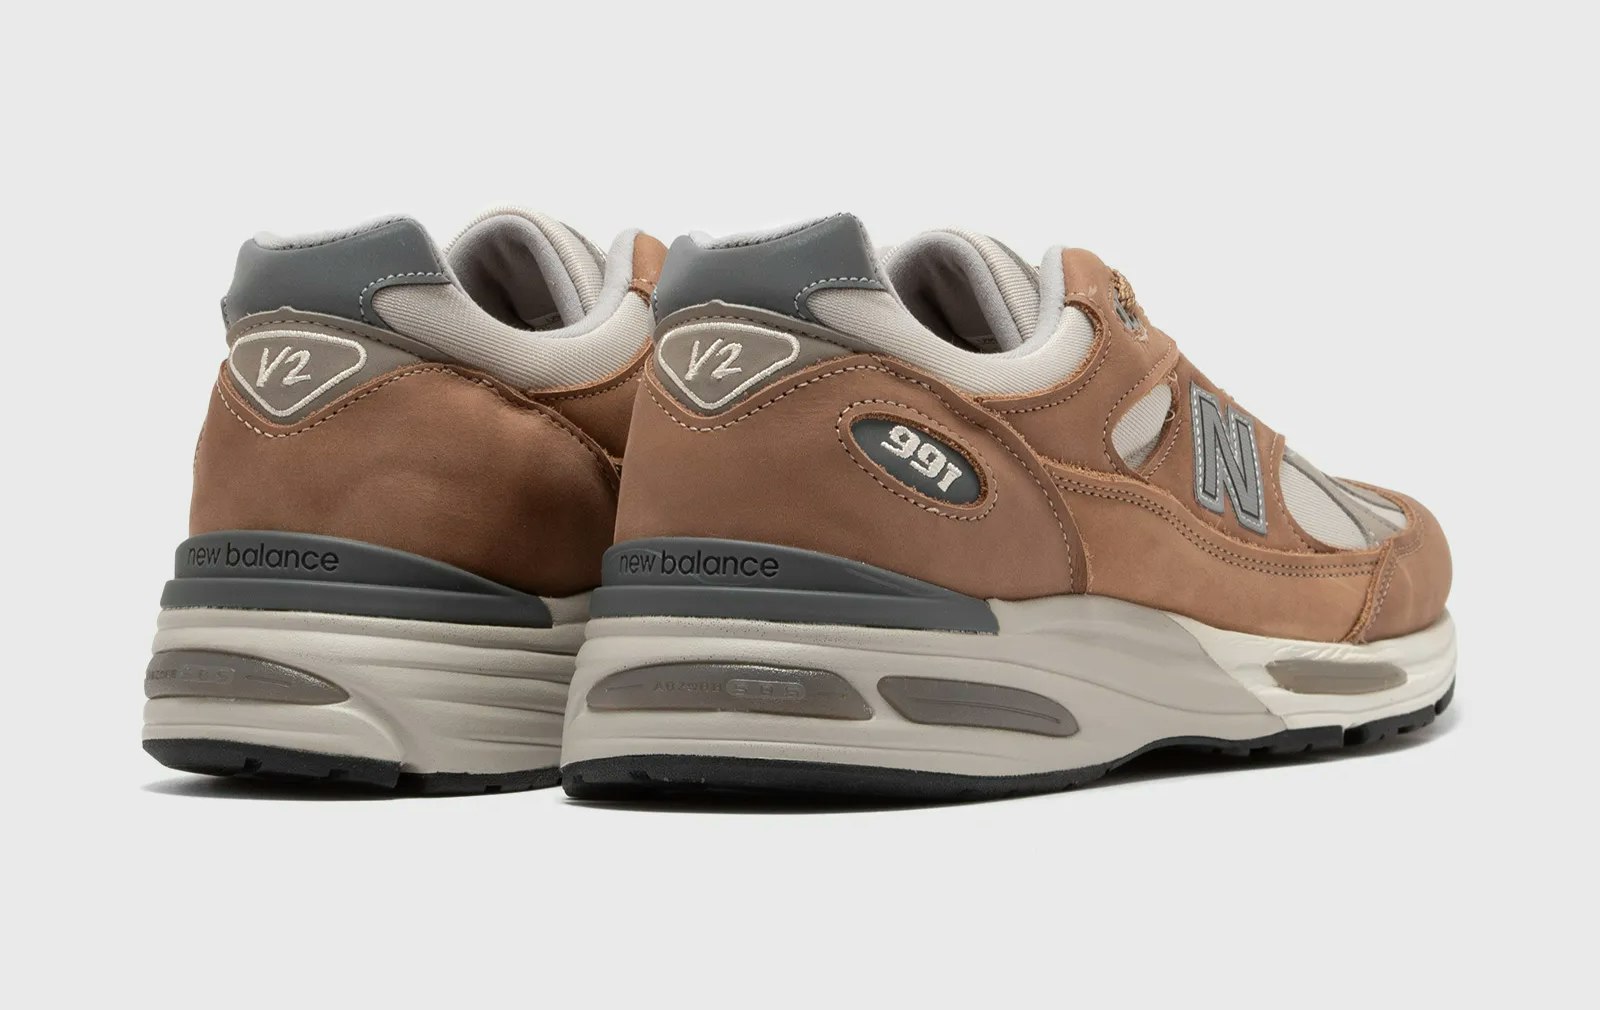 New Balance 991v2 "Made in UK" (Coco Mocca)